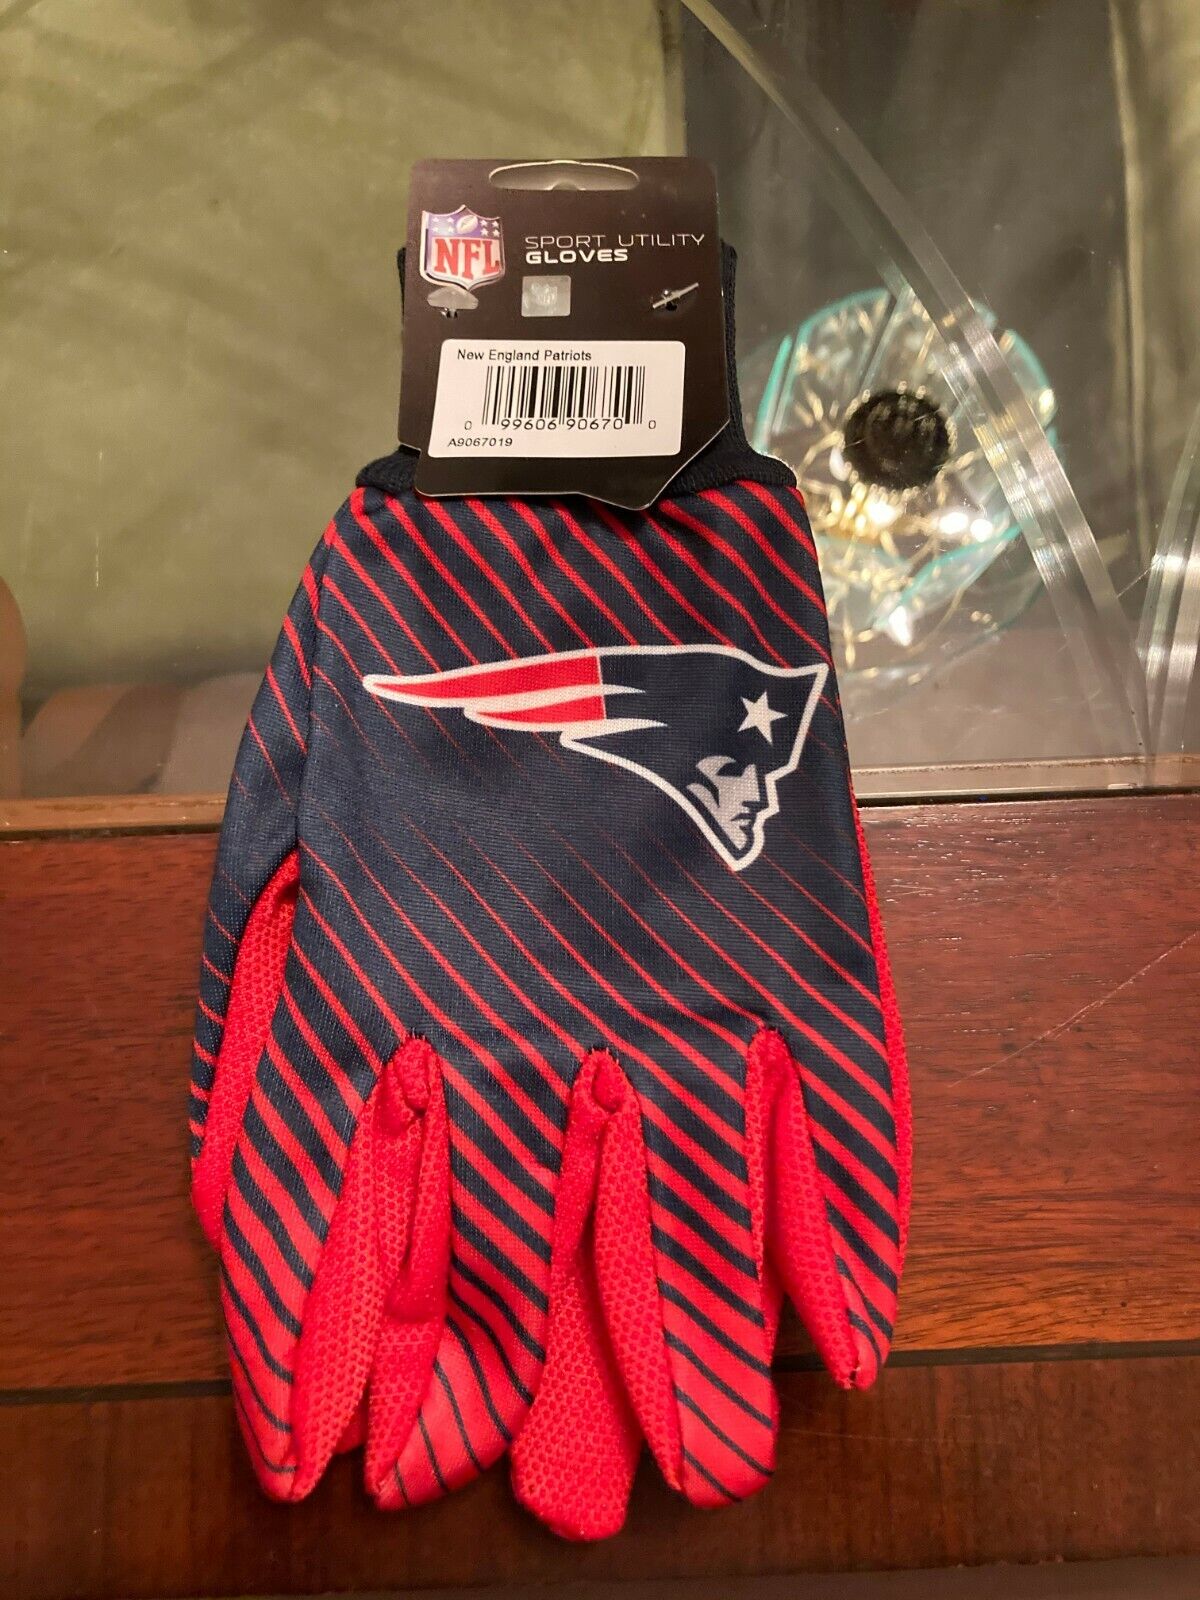 New England Patriots Sublimated Sport Utility Gloves